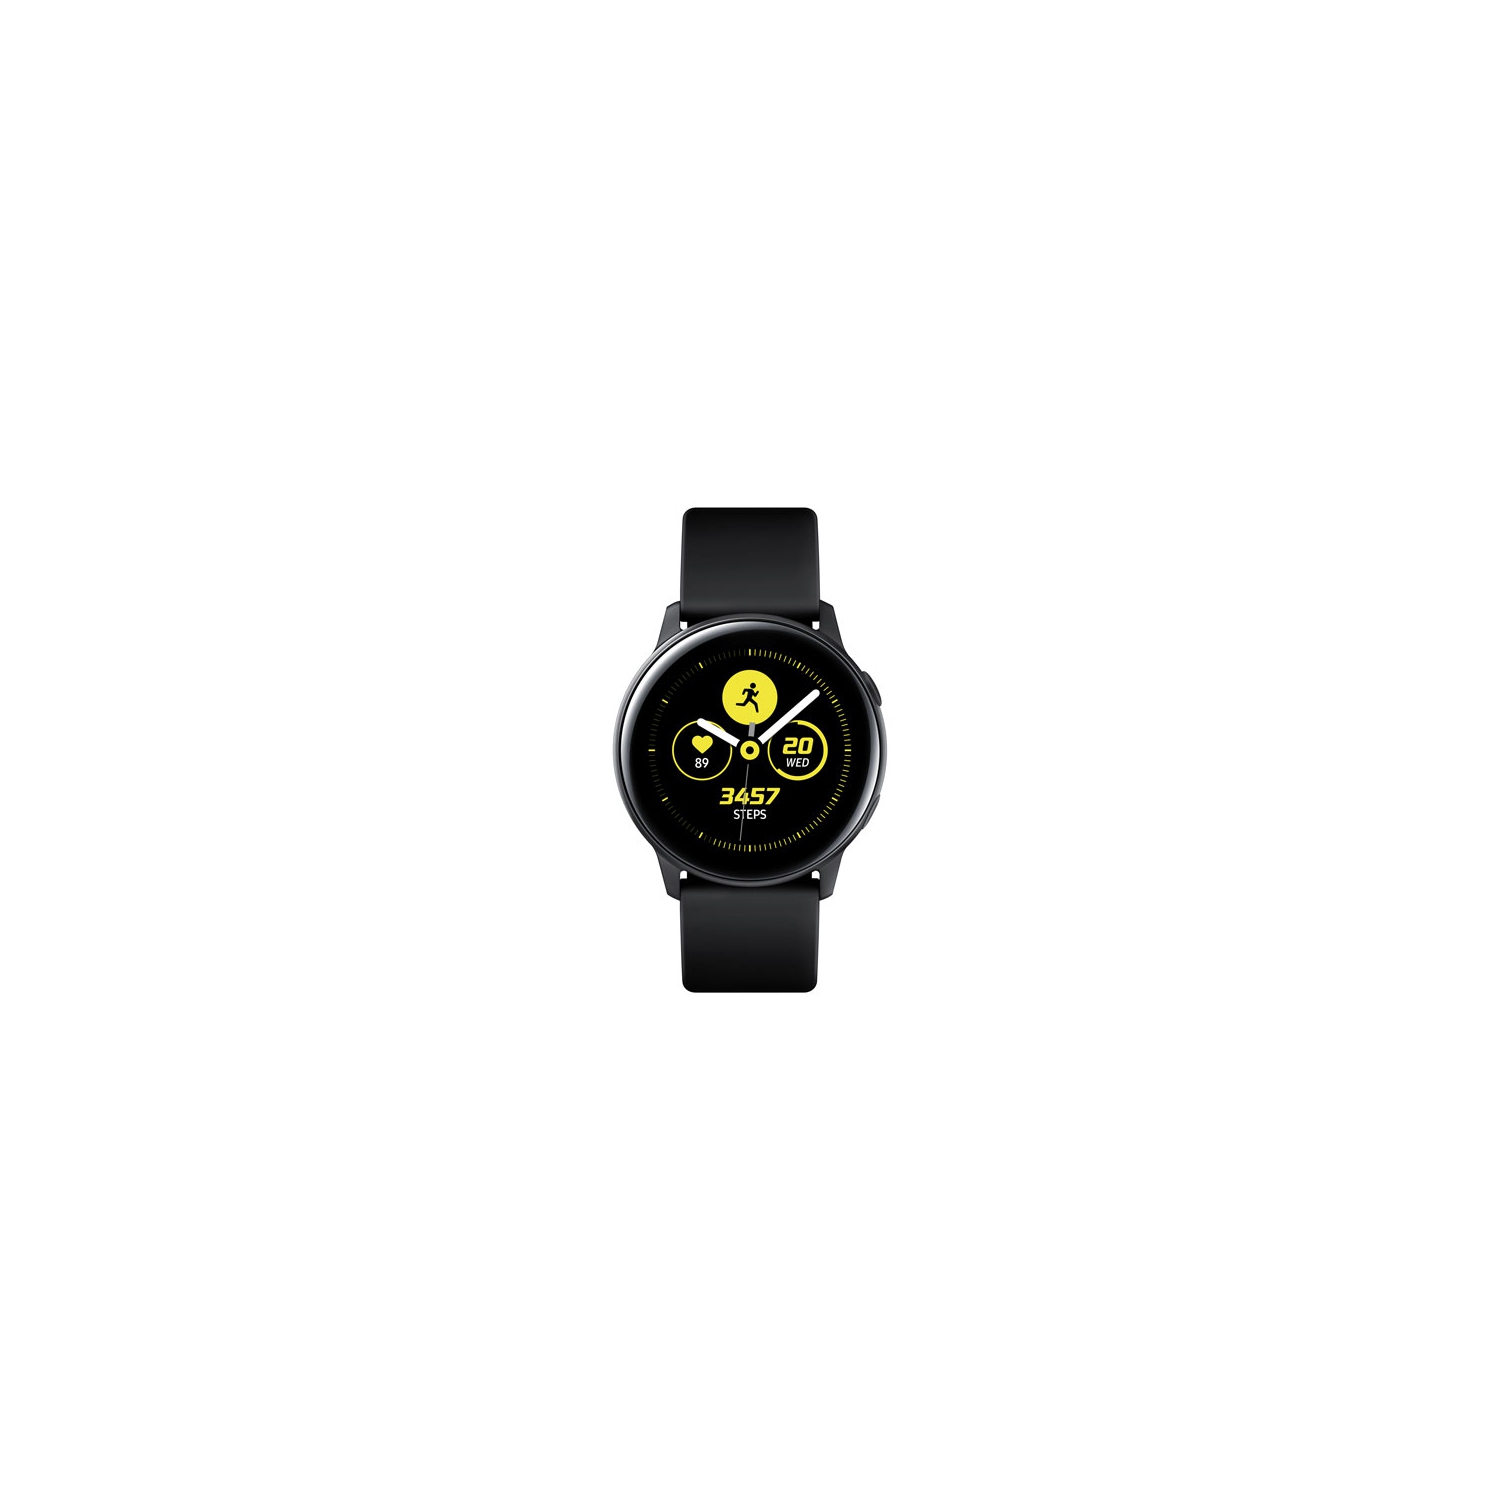 Refurbished (Good) - Samsung Galaxy Watch Active 40mm Smartwatch with Heart Rate Monitor - Black